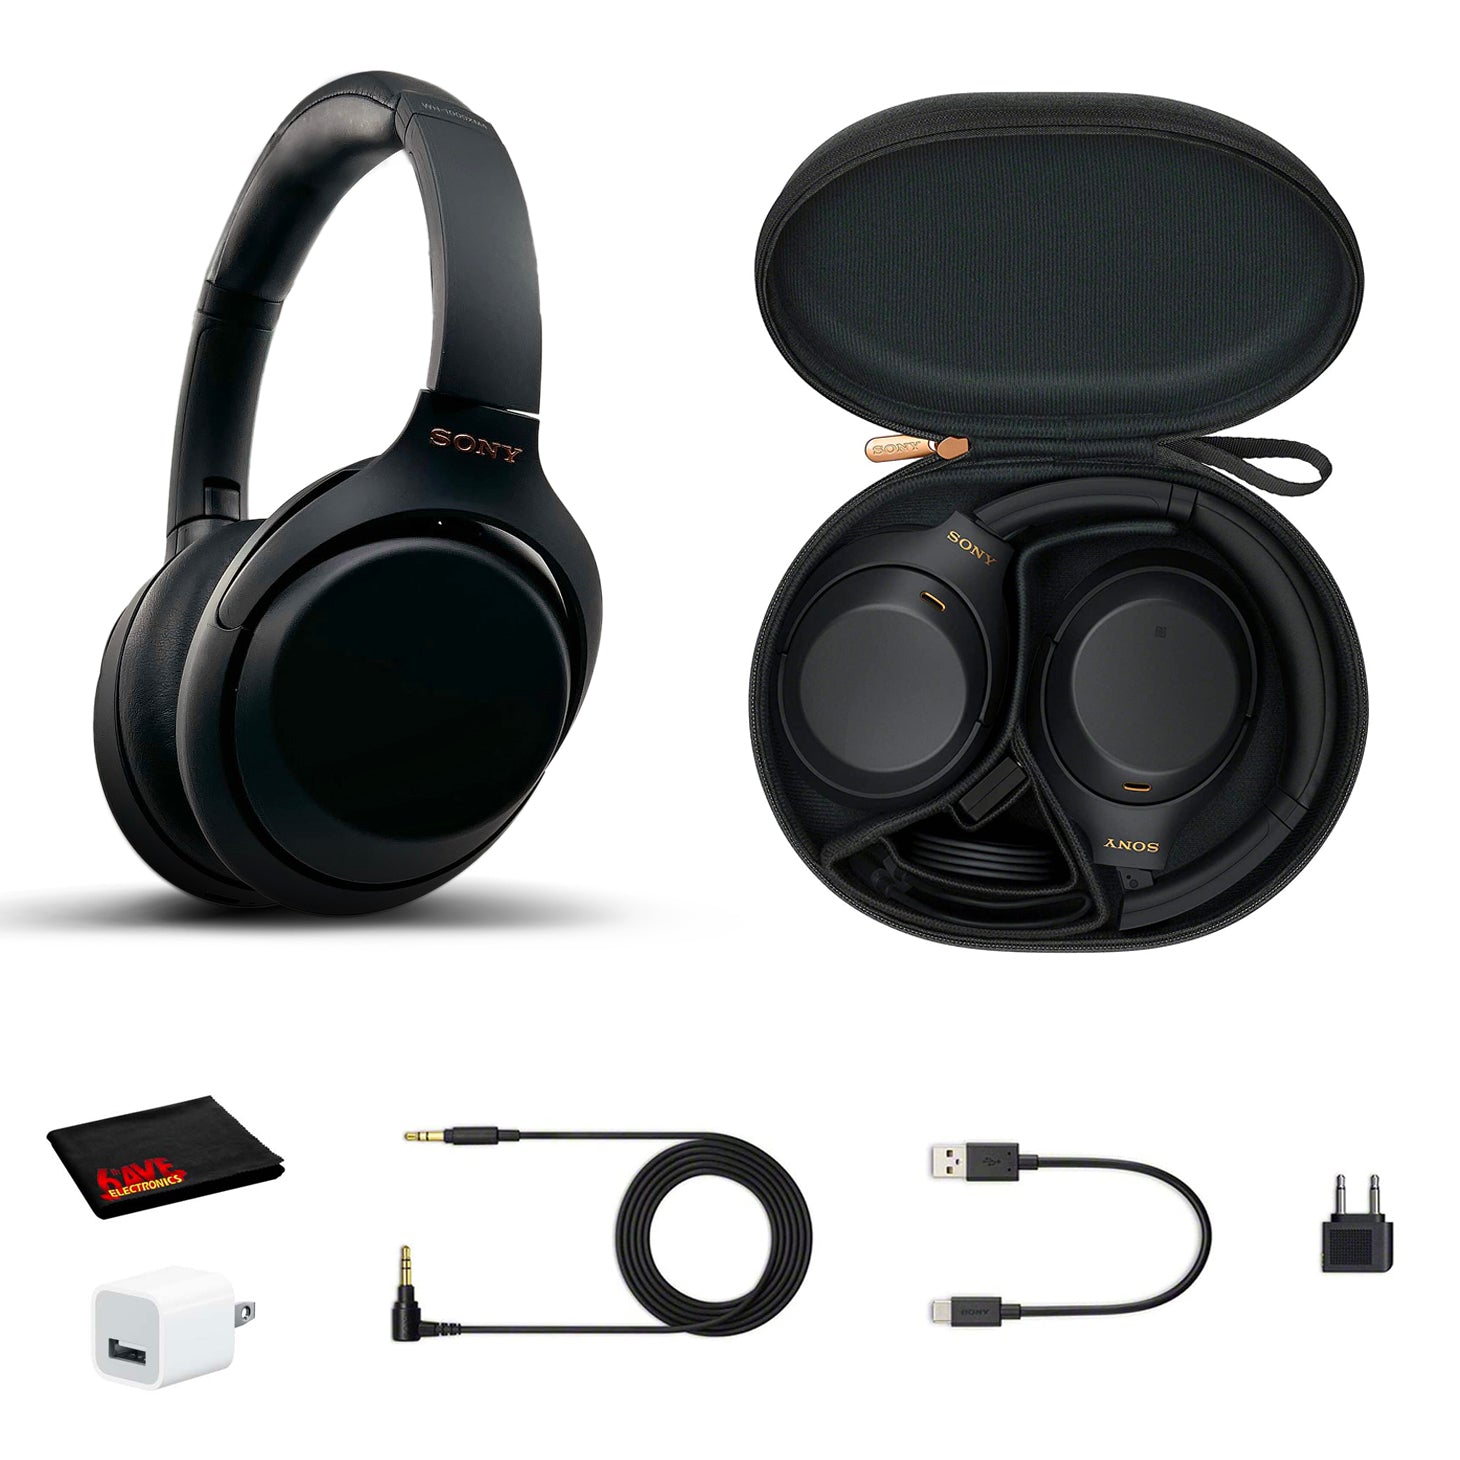 Sony WH-1000XM4 Wireless Noise Canceling Overhead Headphones with Mic for Phone-Call, Voice Control, With USB Wall Adapter and MicroFiber Cleaning Cloth - Bundle